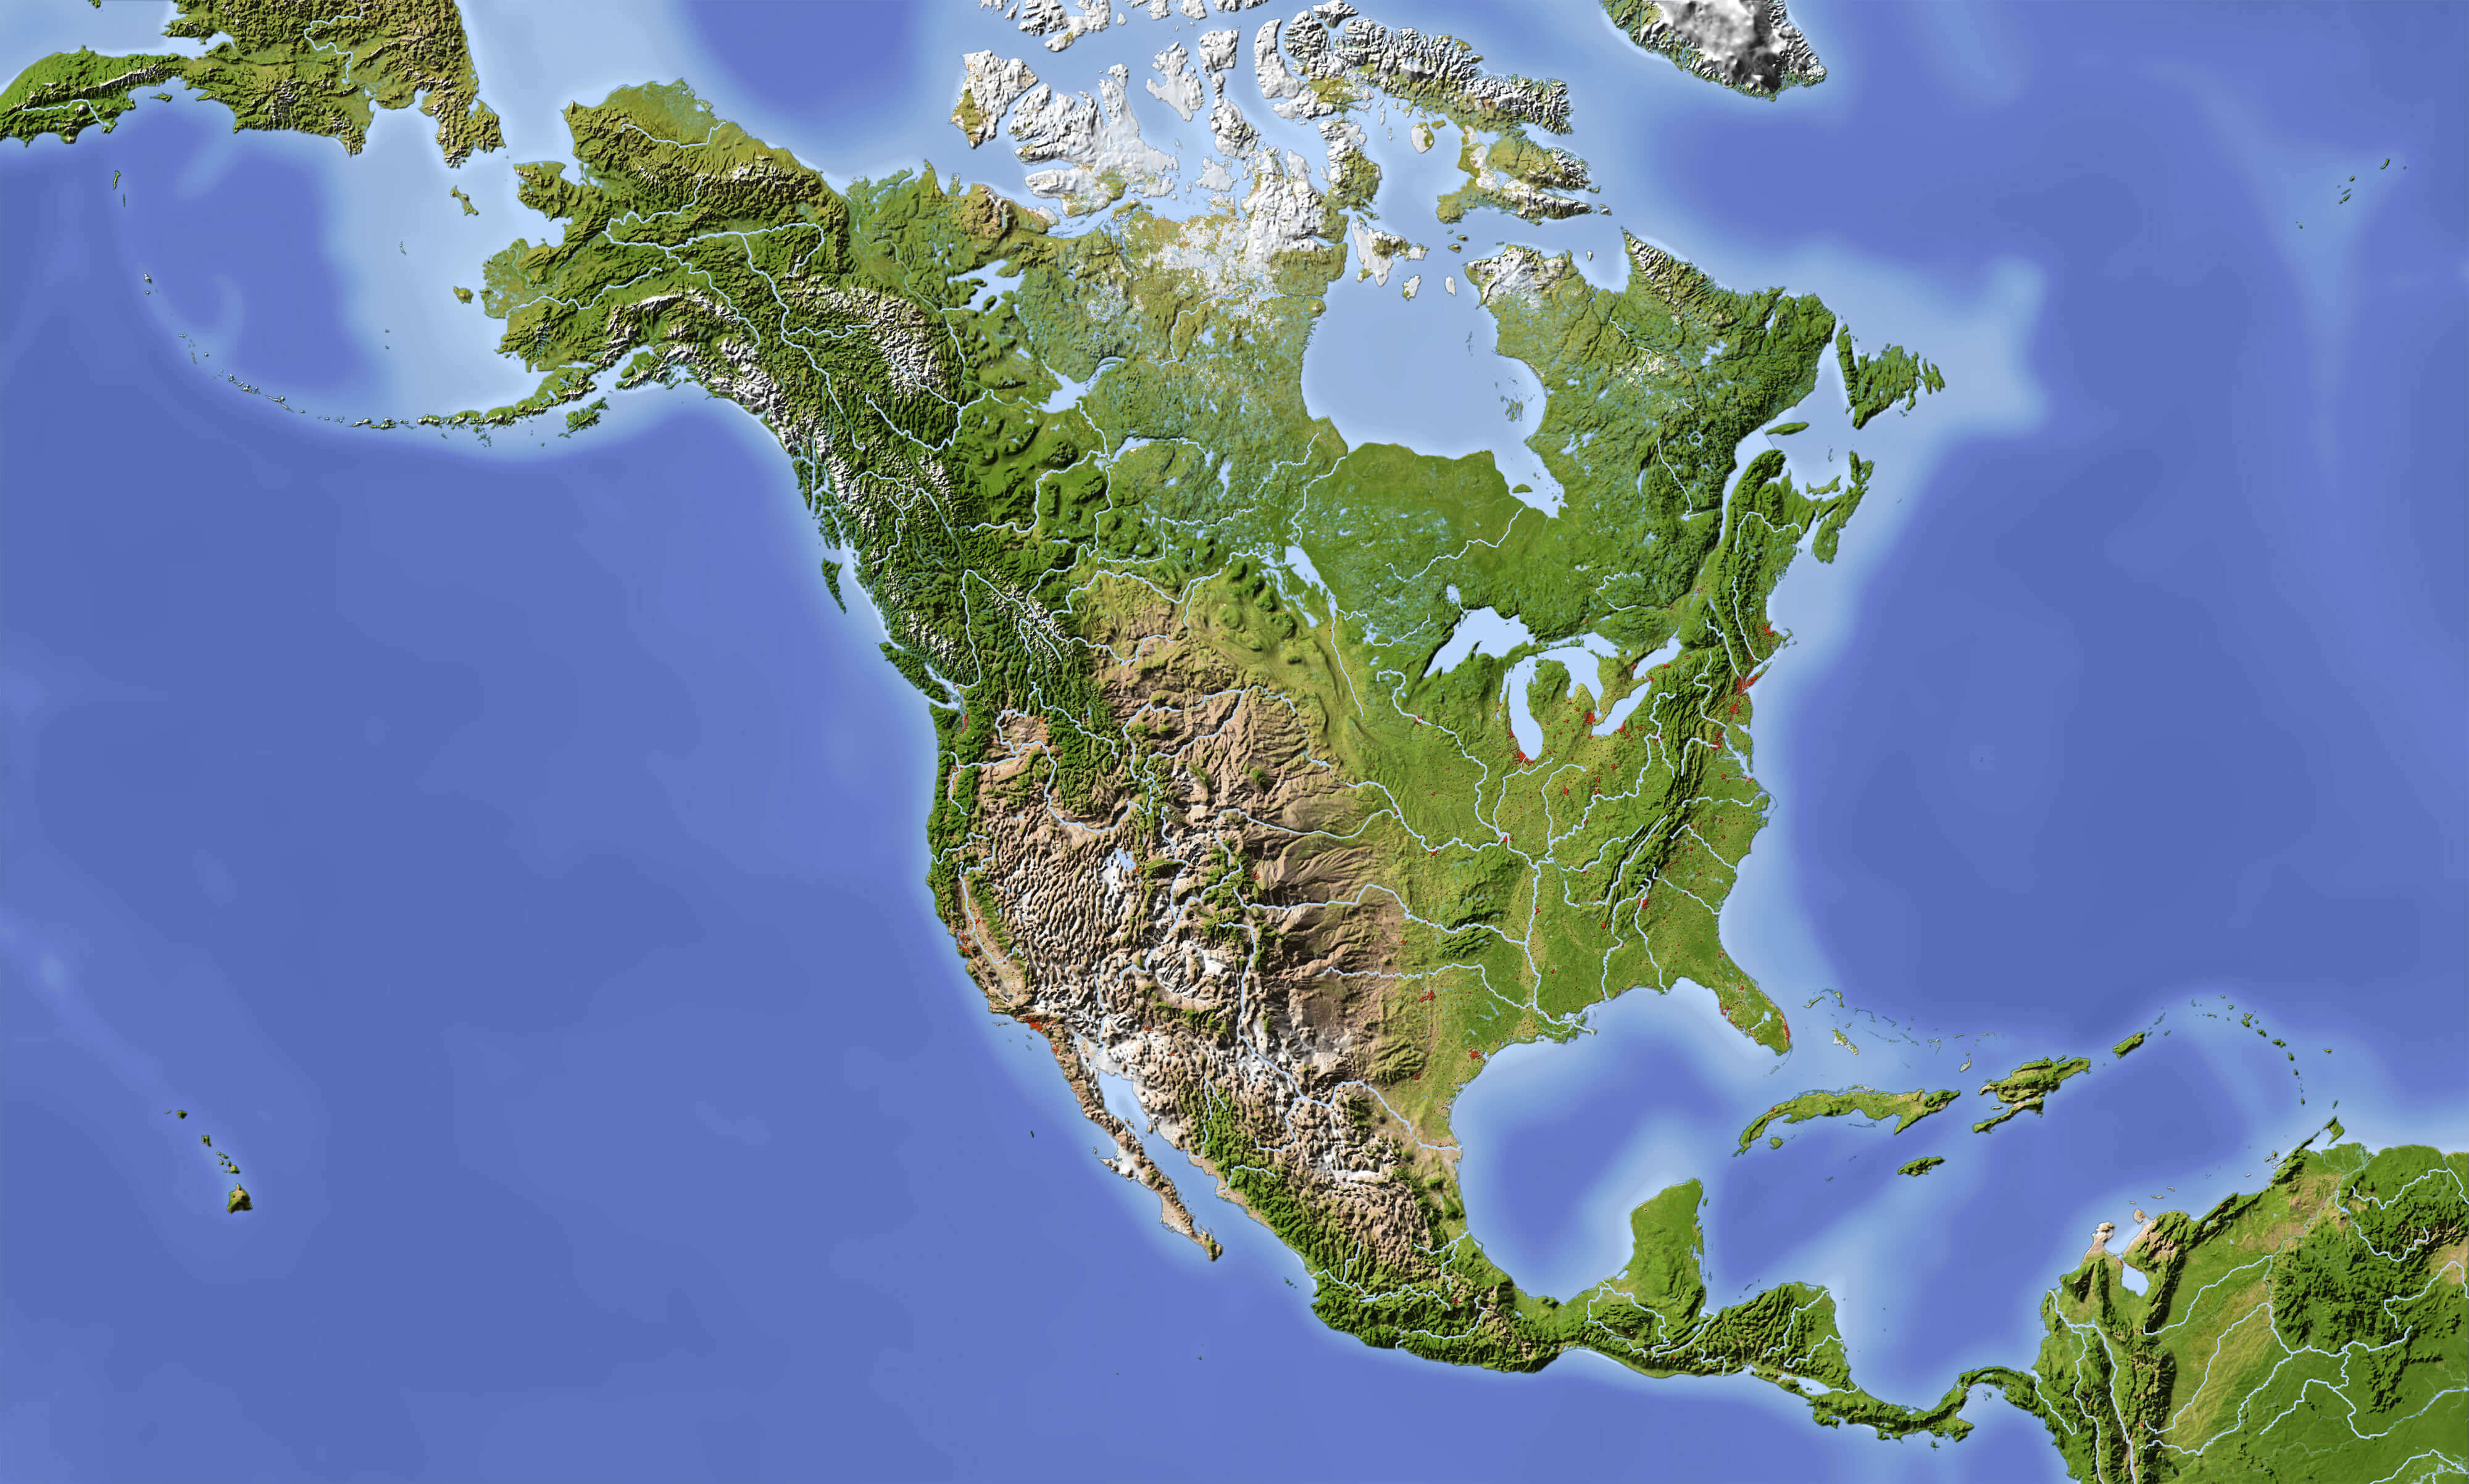 north america physical map from space